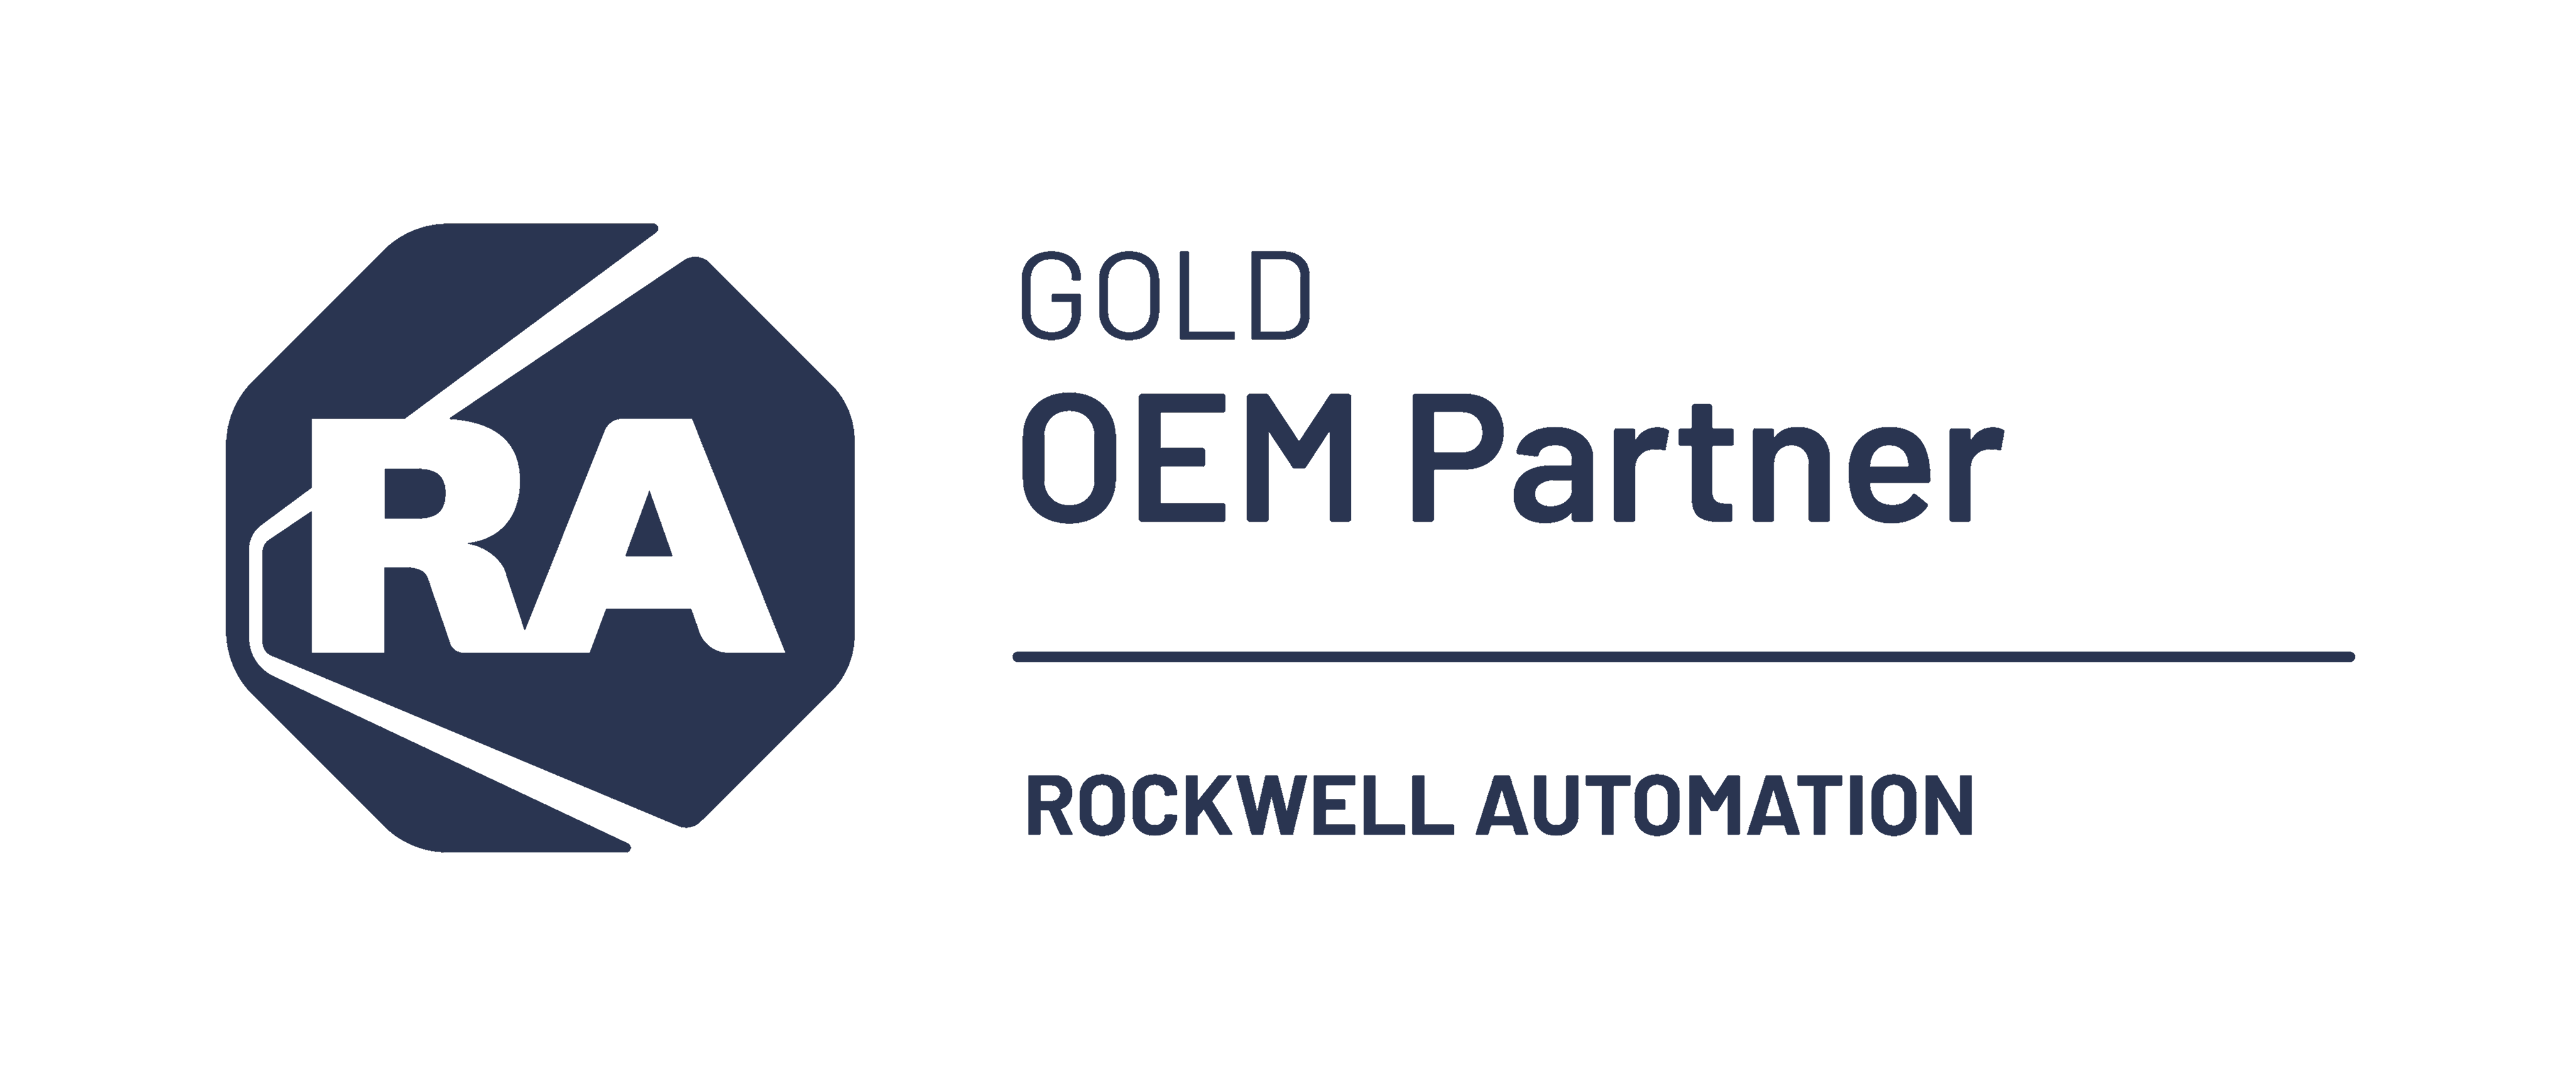 gold oem partner of rockwell automation